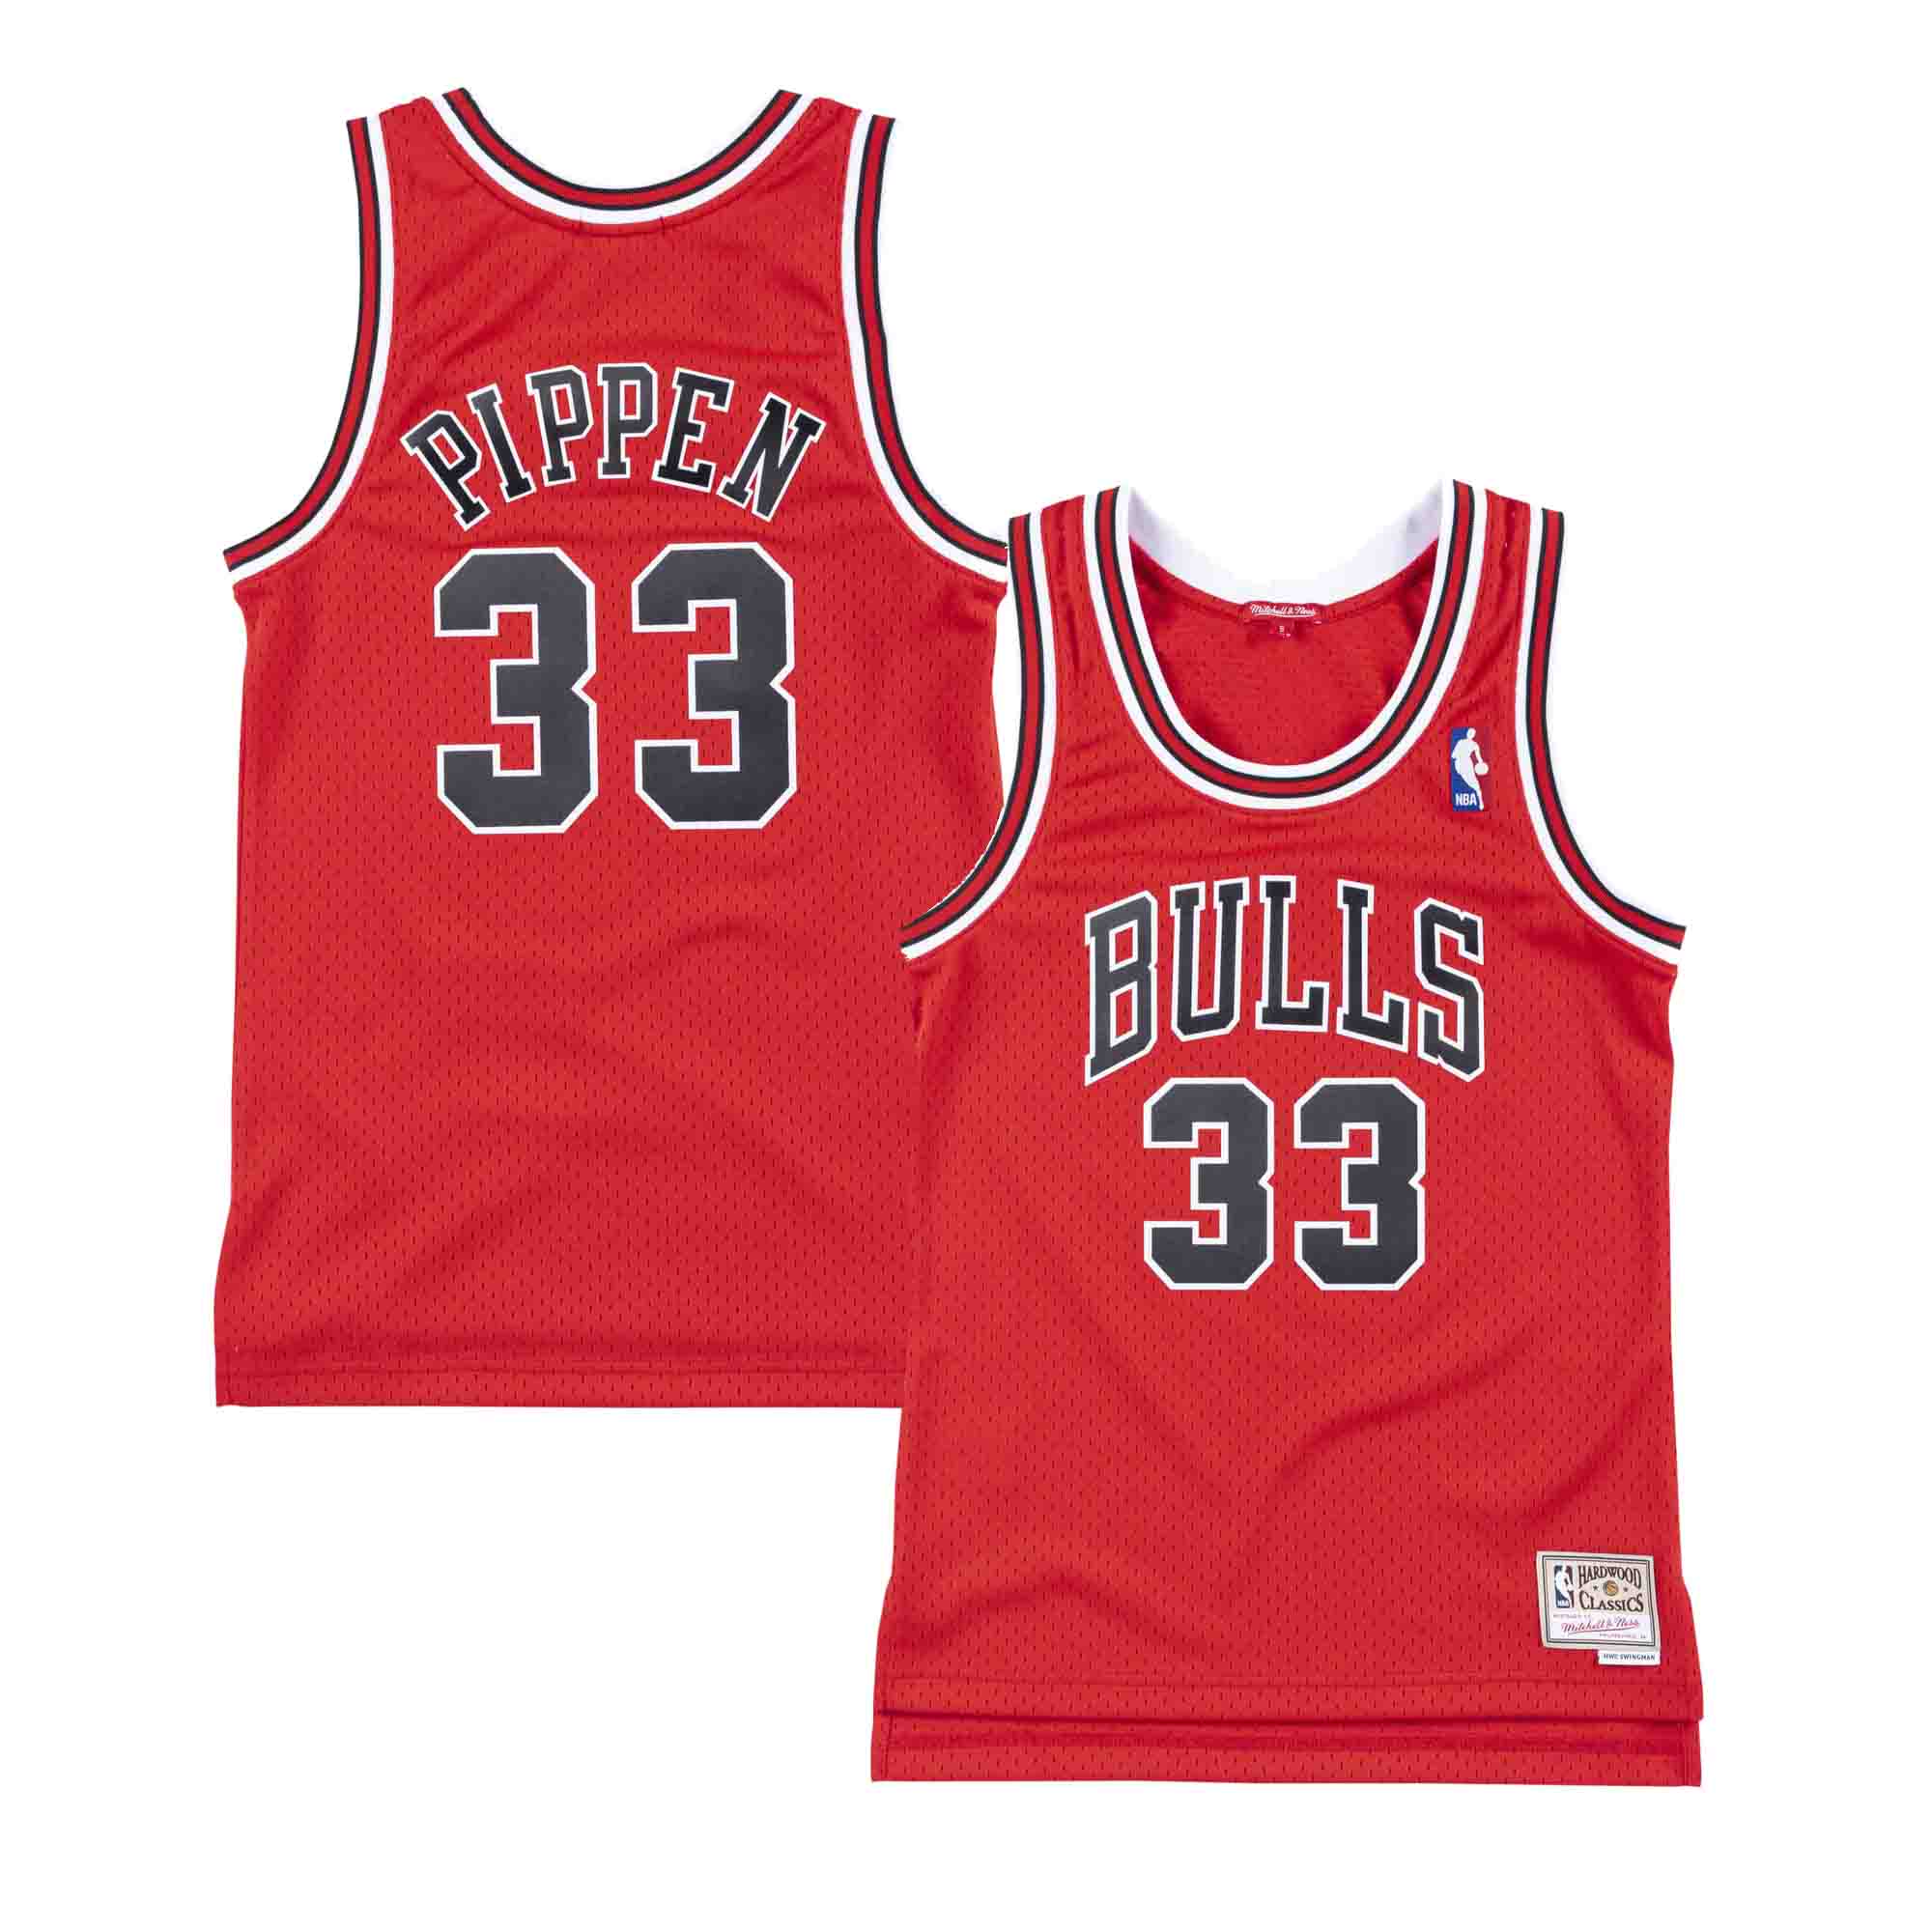 Pippen Bulls Jersey 97-98 - clothing & accessories - by owner - apparel  sale - craigslist